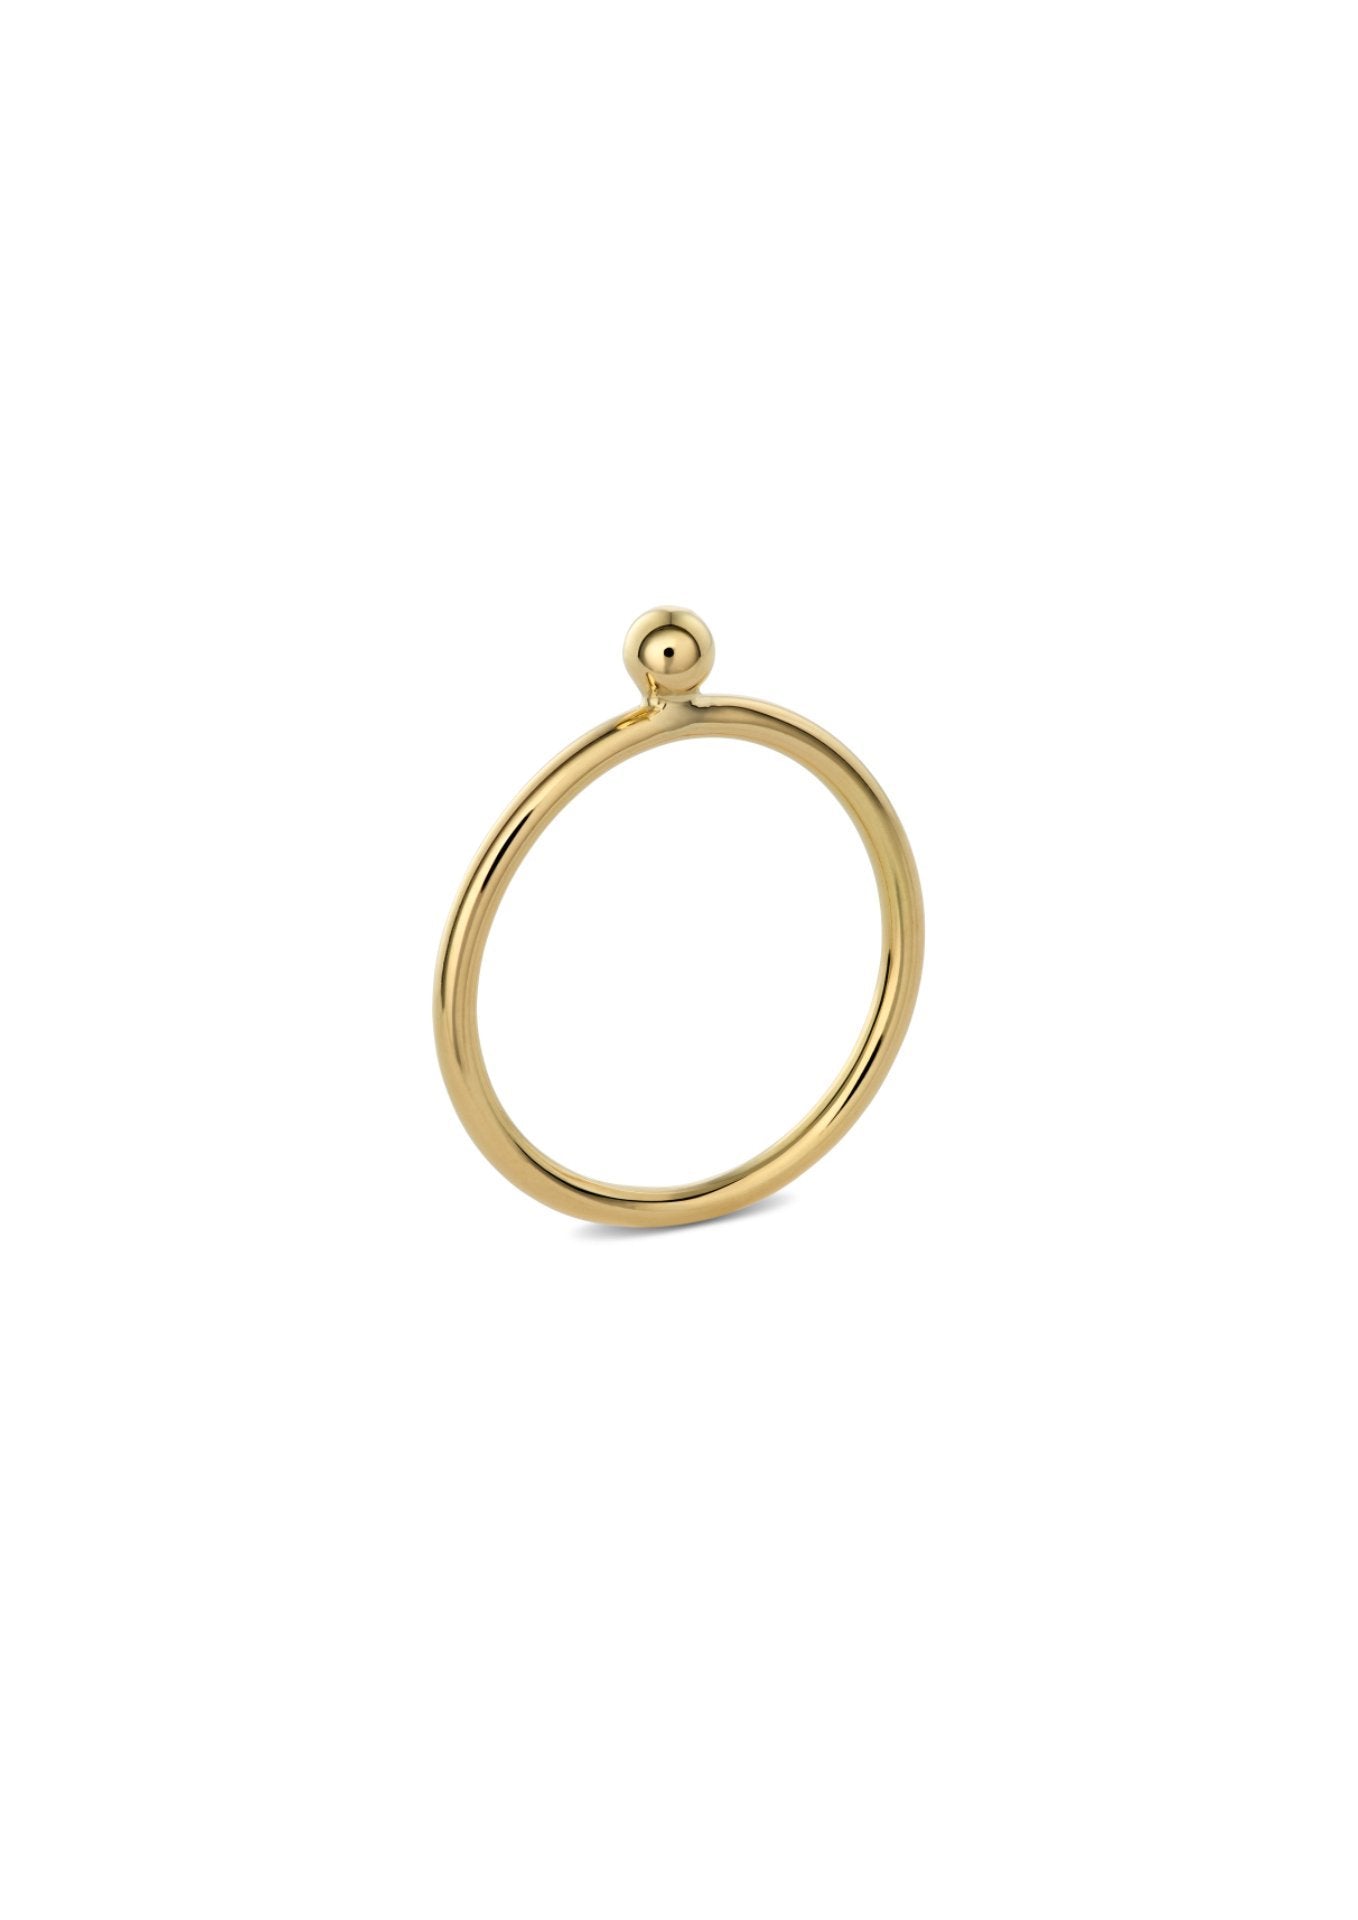 NO MORE accessories Cute Goldie Ring in 18k Gold